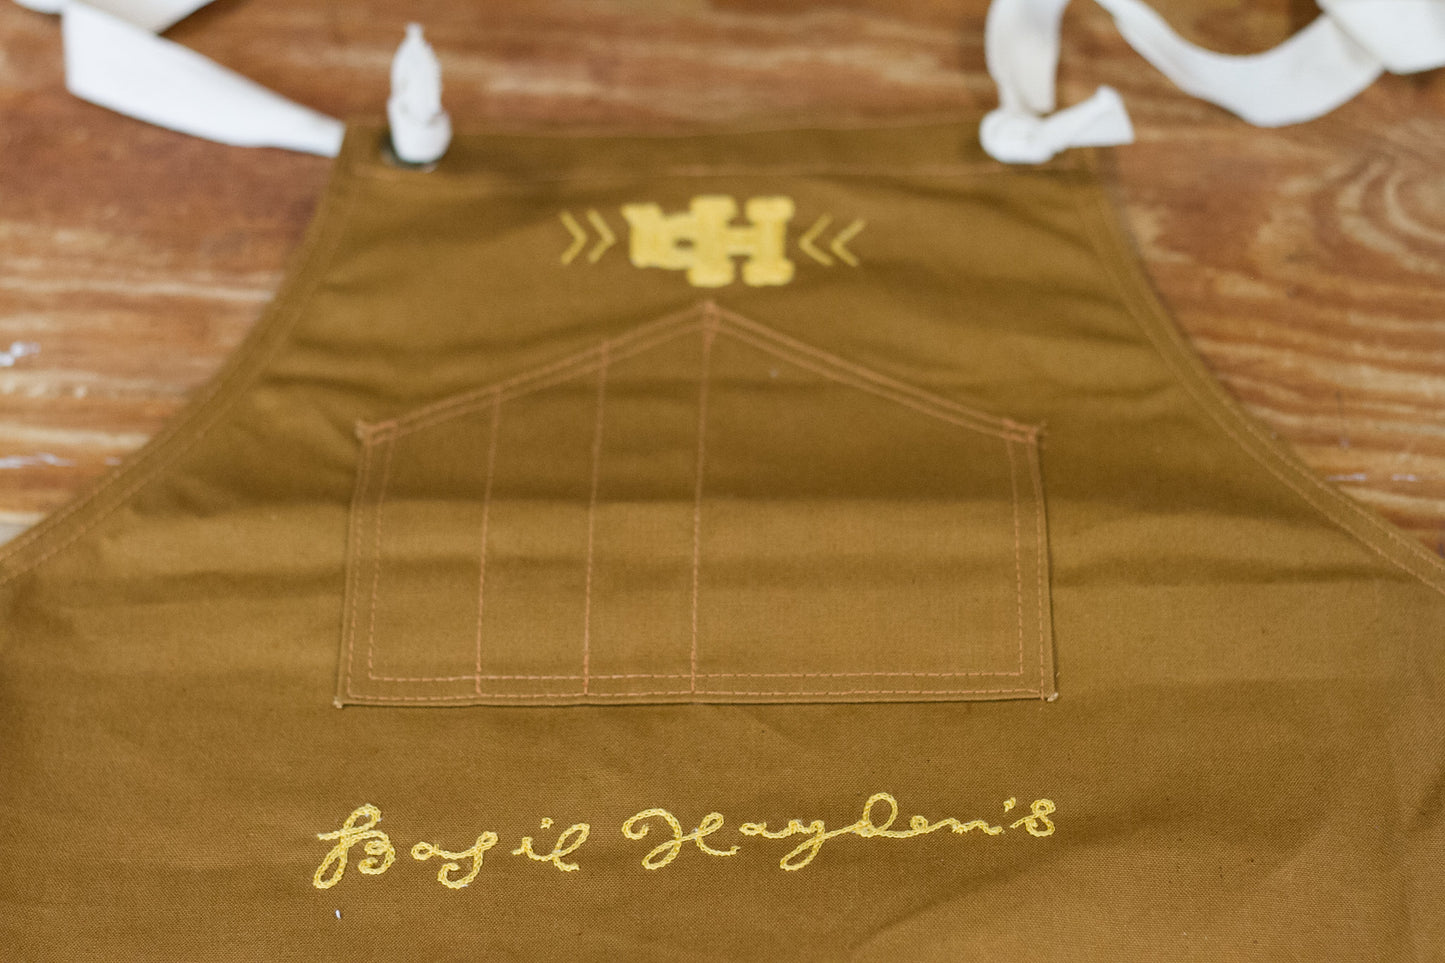 Basil Hayden's x Fort Lonesome x Winter Session Shop Apron